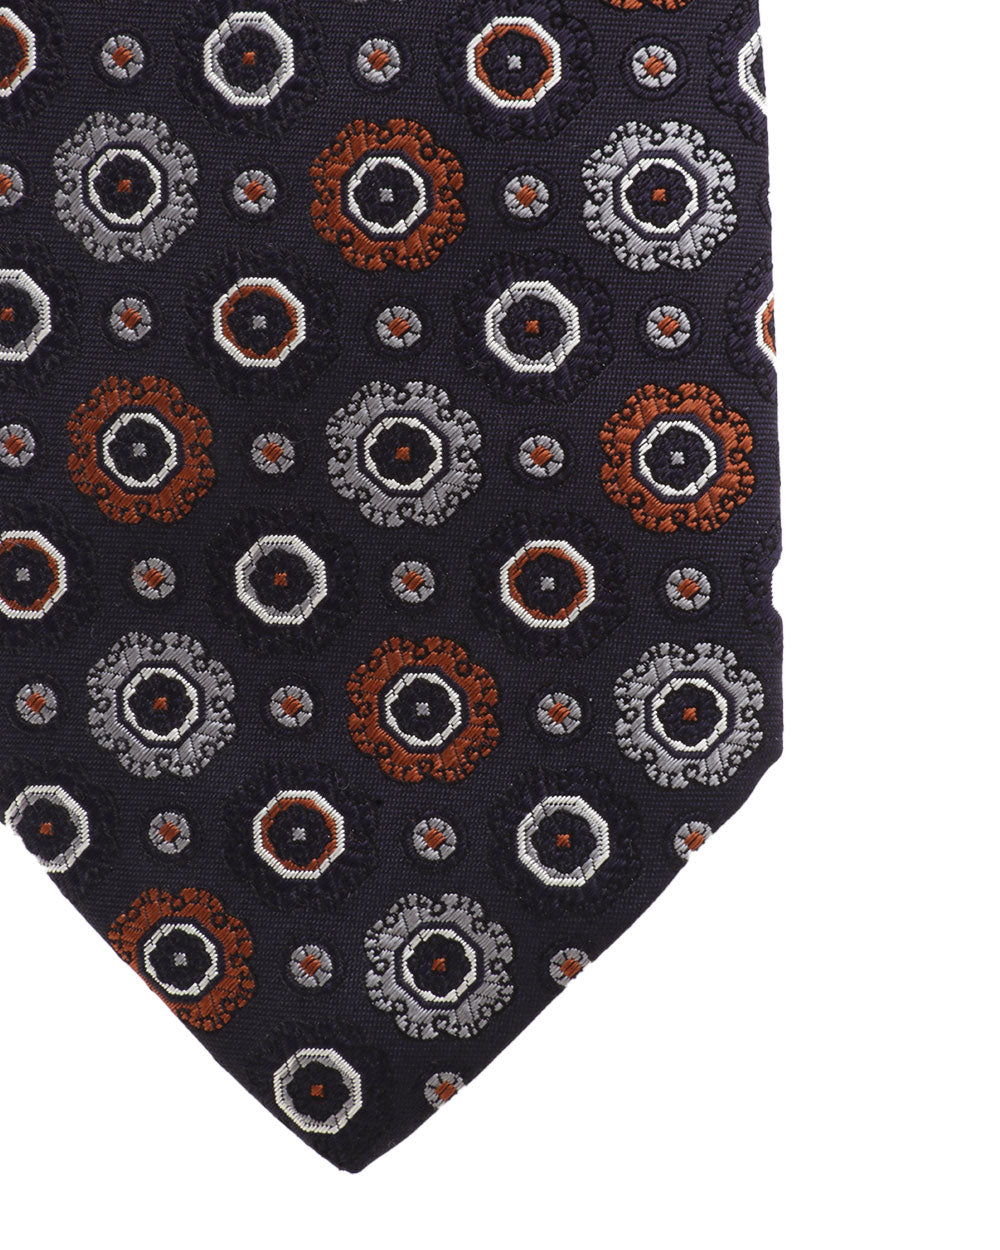 Navy with Brown and Light Blue Multi Medallion Silk Tie